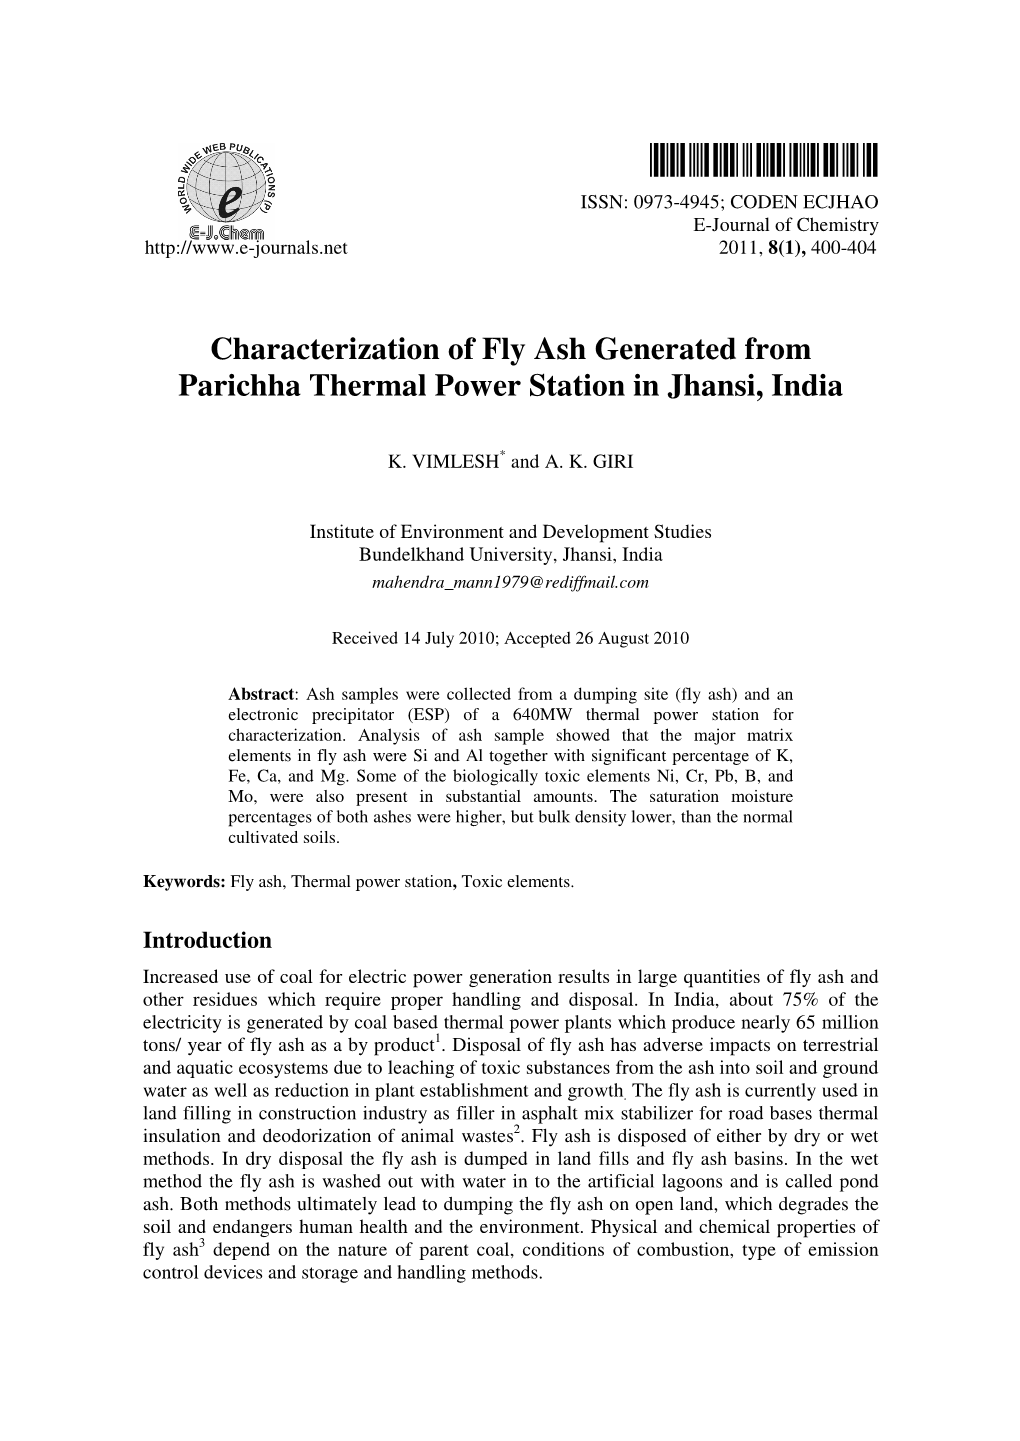 Characterization of Fly Ash Generated from Parichha Thermal Power Station in Jhansi, India